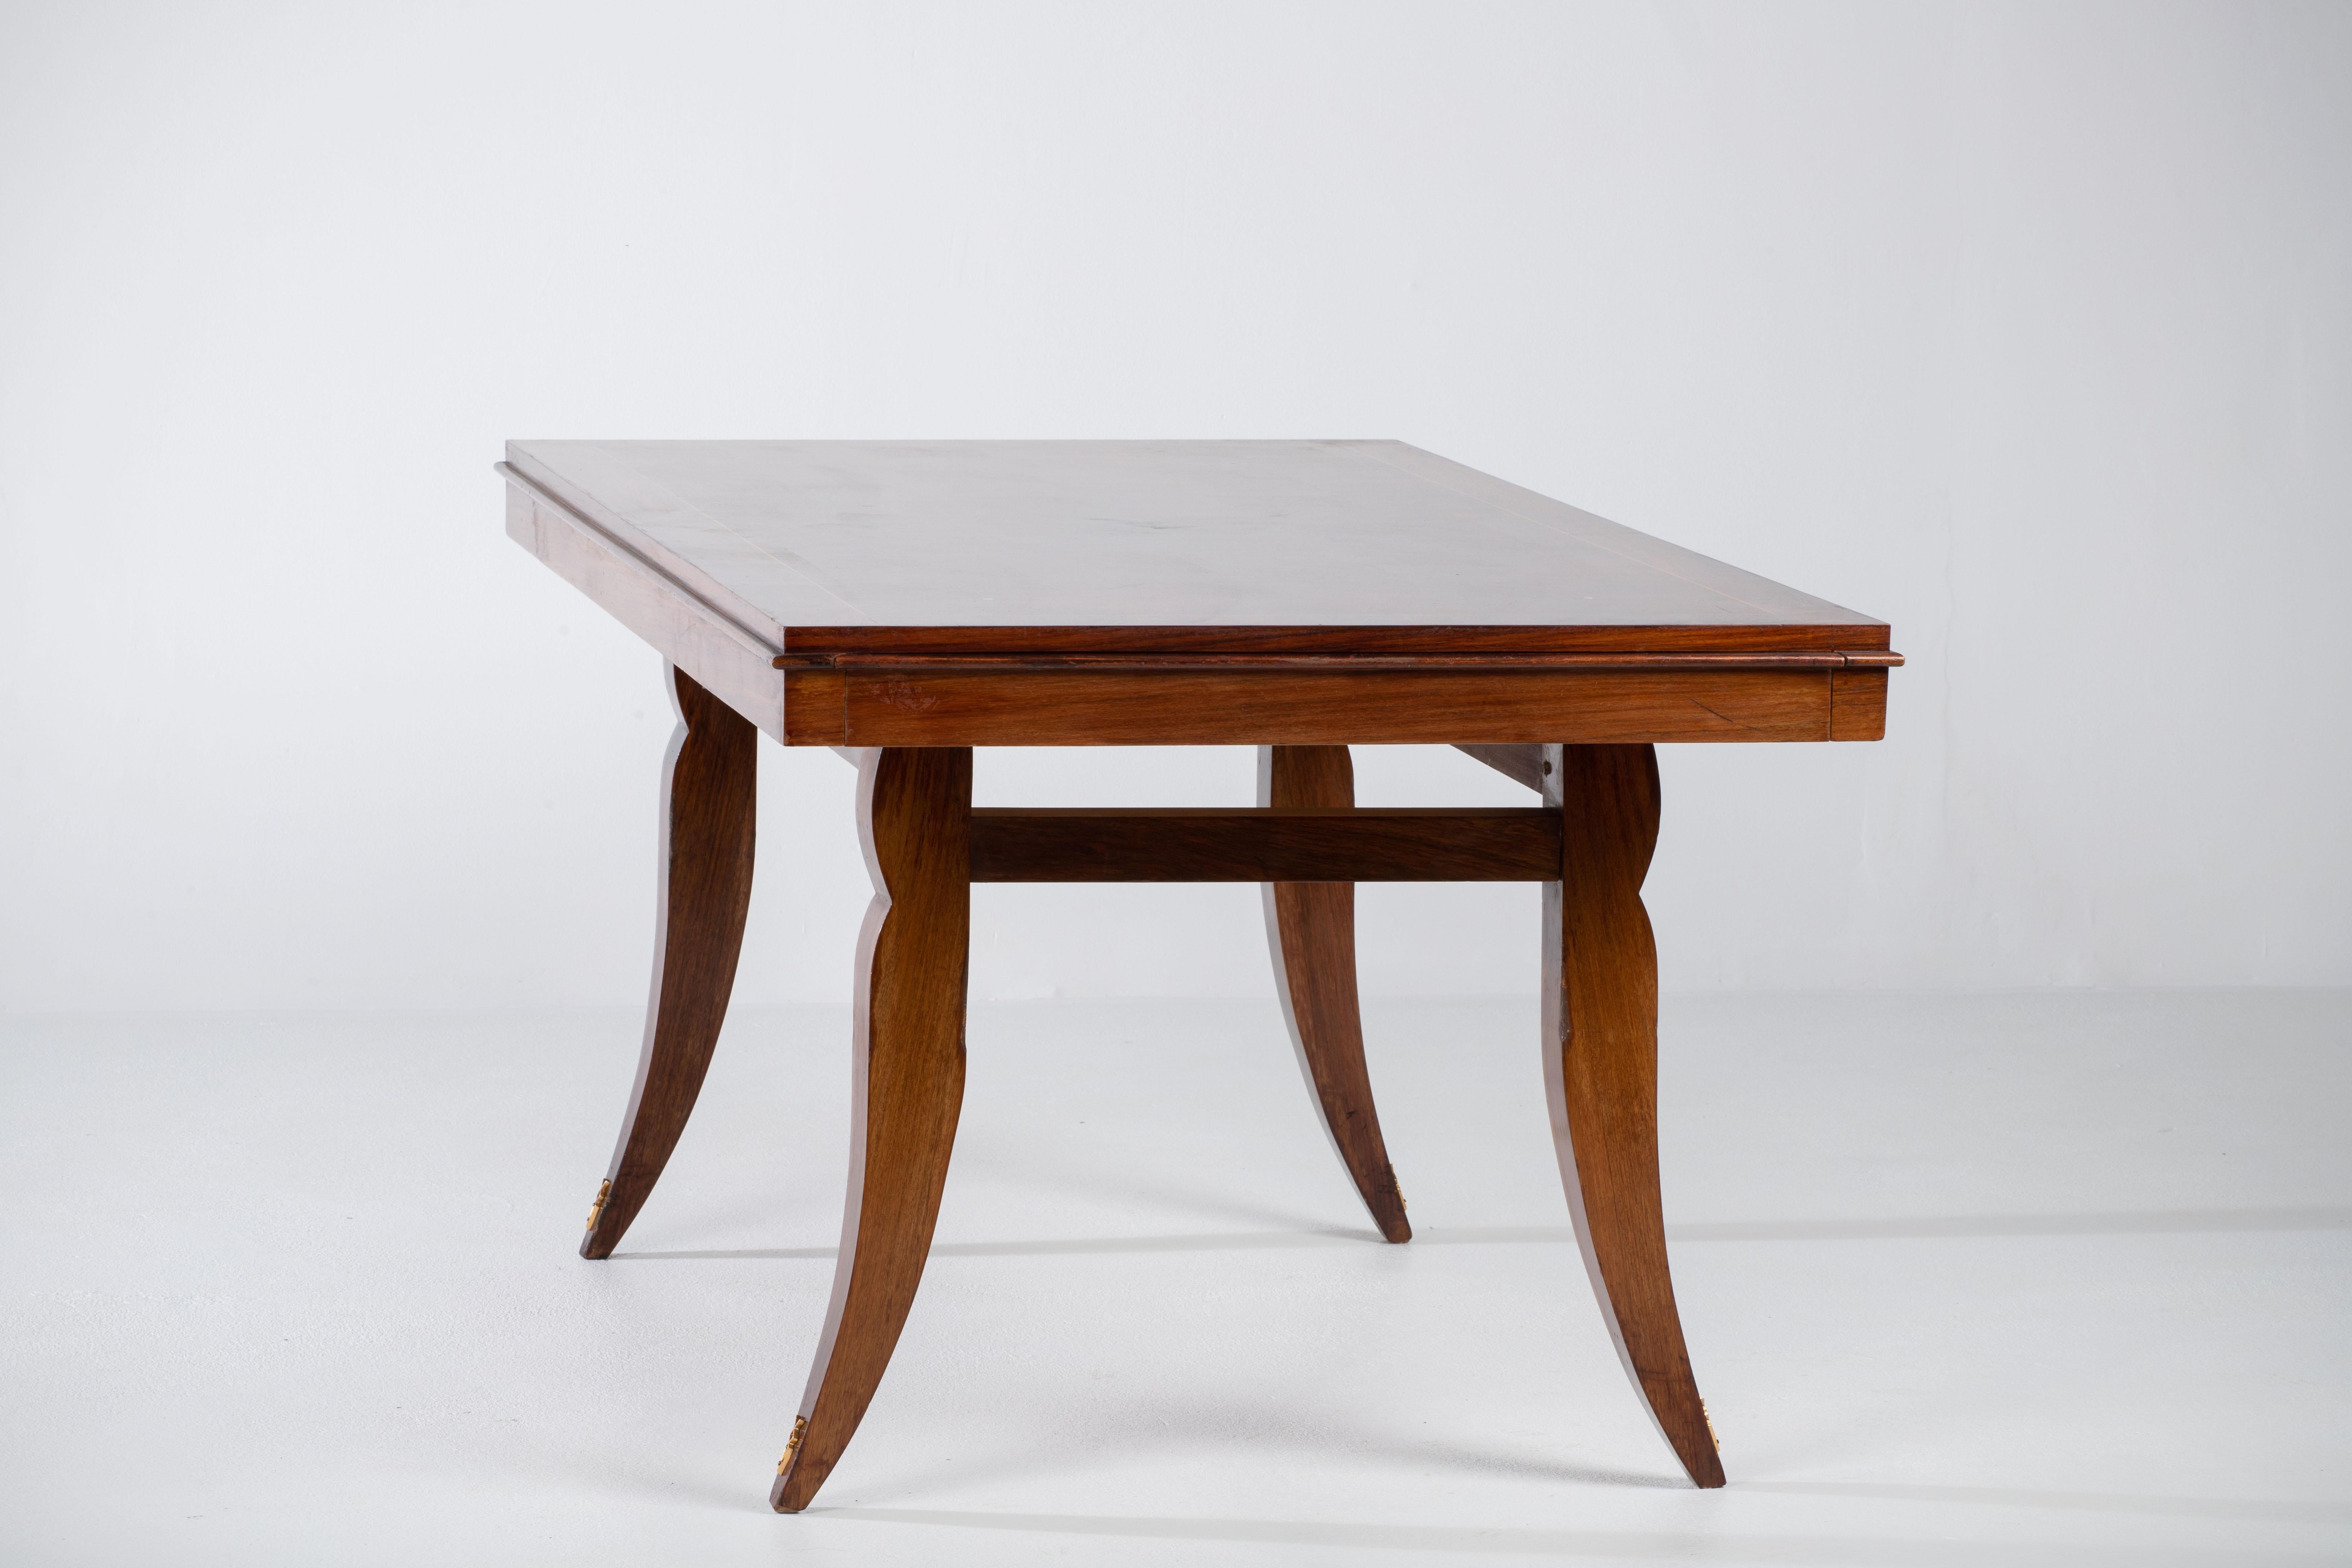 Dining table, Macassar, France, 1940s.

Majestic centre table in Macassar. This Art Deco table shows great craftsmanship. The base and legs are beautifully detailed. This table has an elegant appearance. This design combines the more feminine and